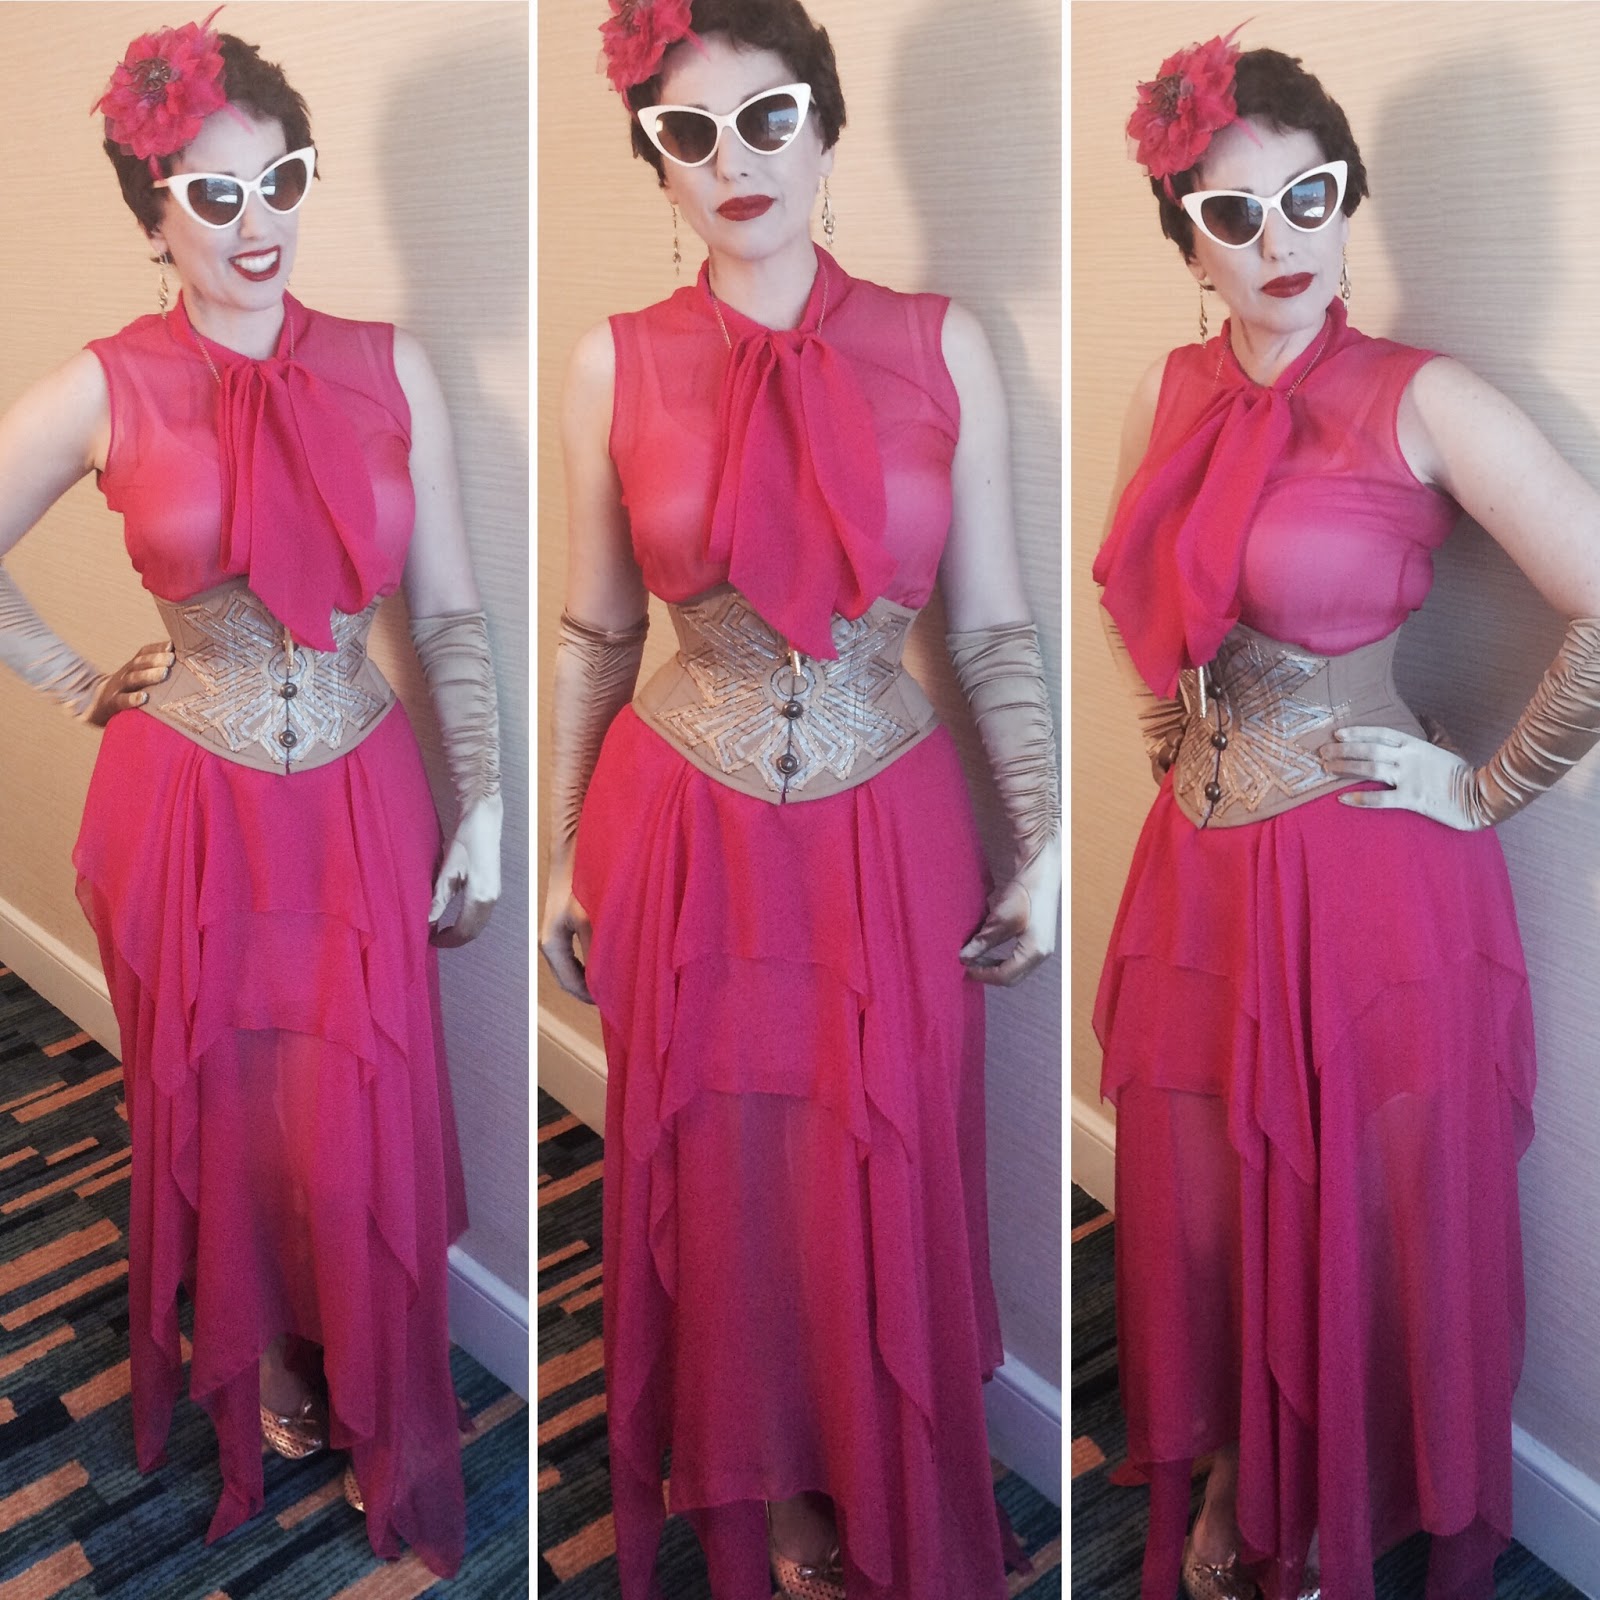 Retro Rack Gail Carriger In Retro 1930s Hot Pink Dress And Gold